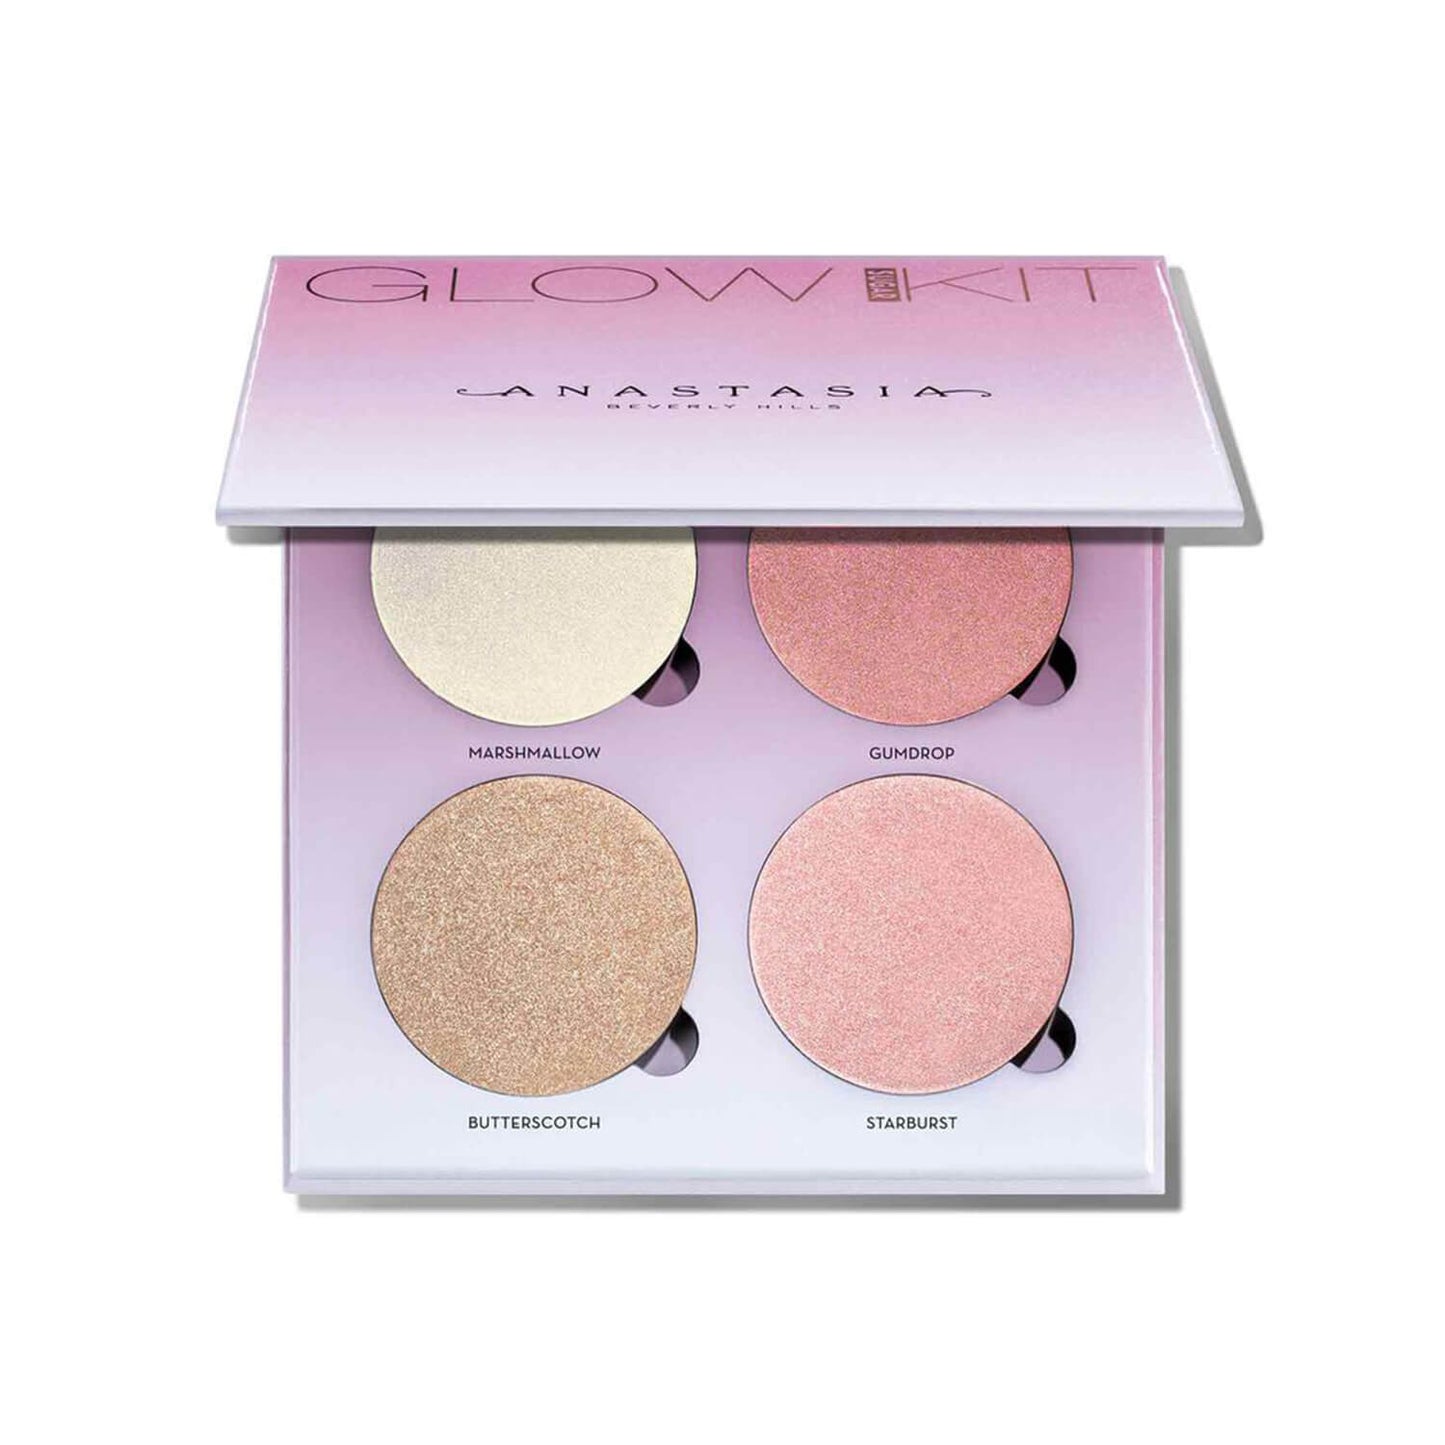 buy anastasia sugar glow highlighter kit available at heygirl.pk for cash on delivery in Karachi, Lahore, Islamabad, Rawalpindi across Pakistan. 